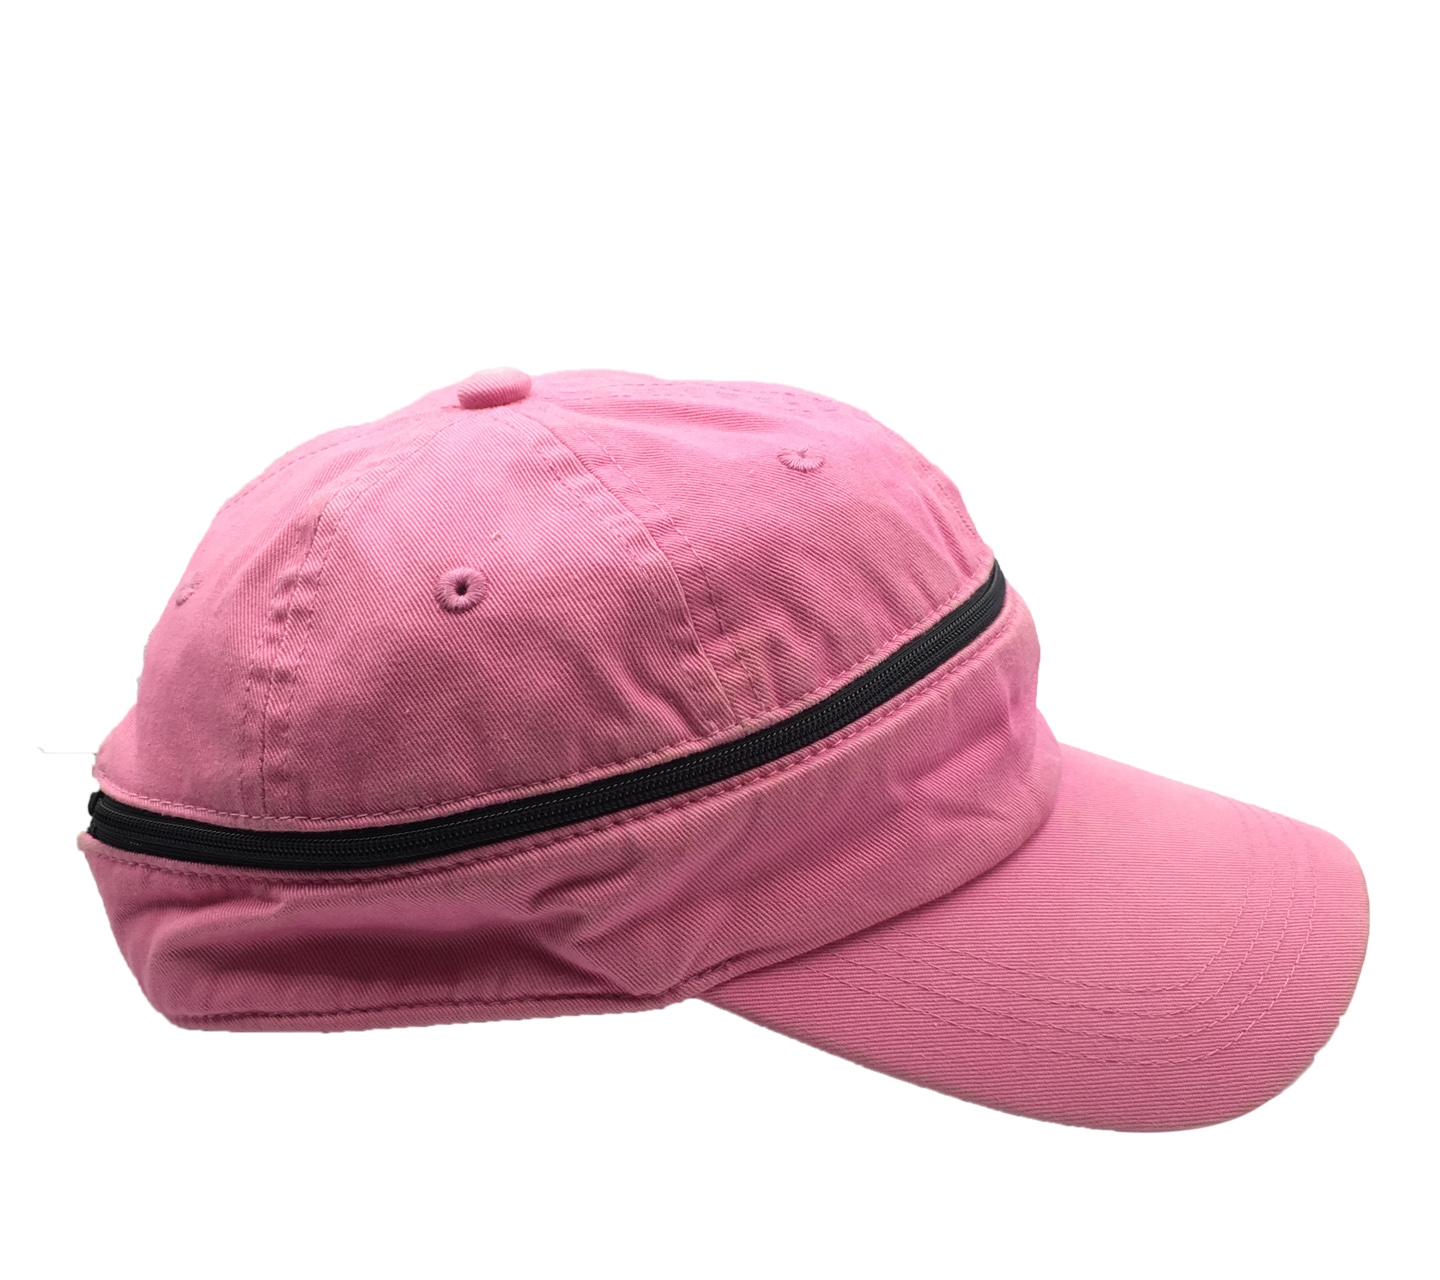 Rip Curl Pink Hats